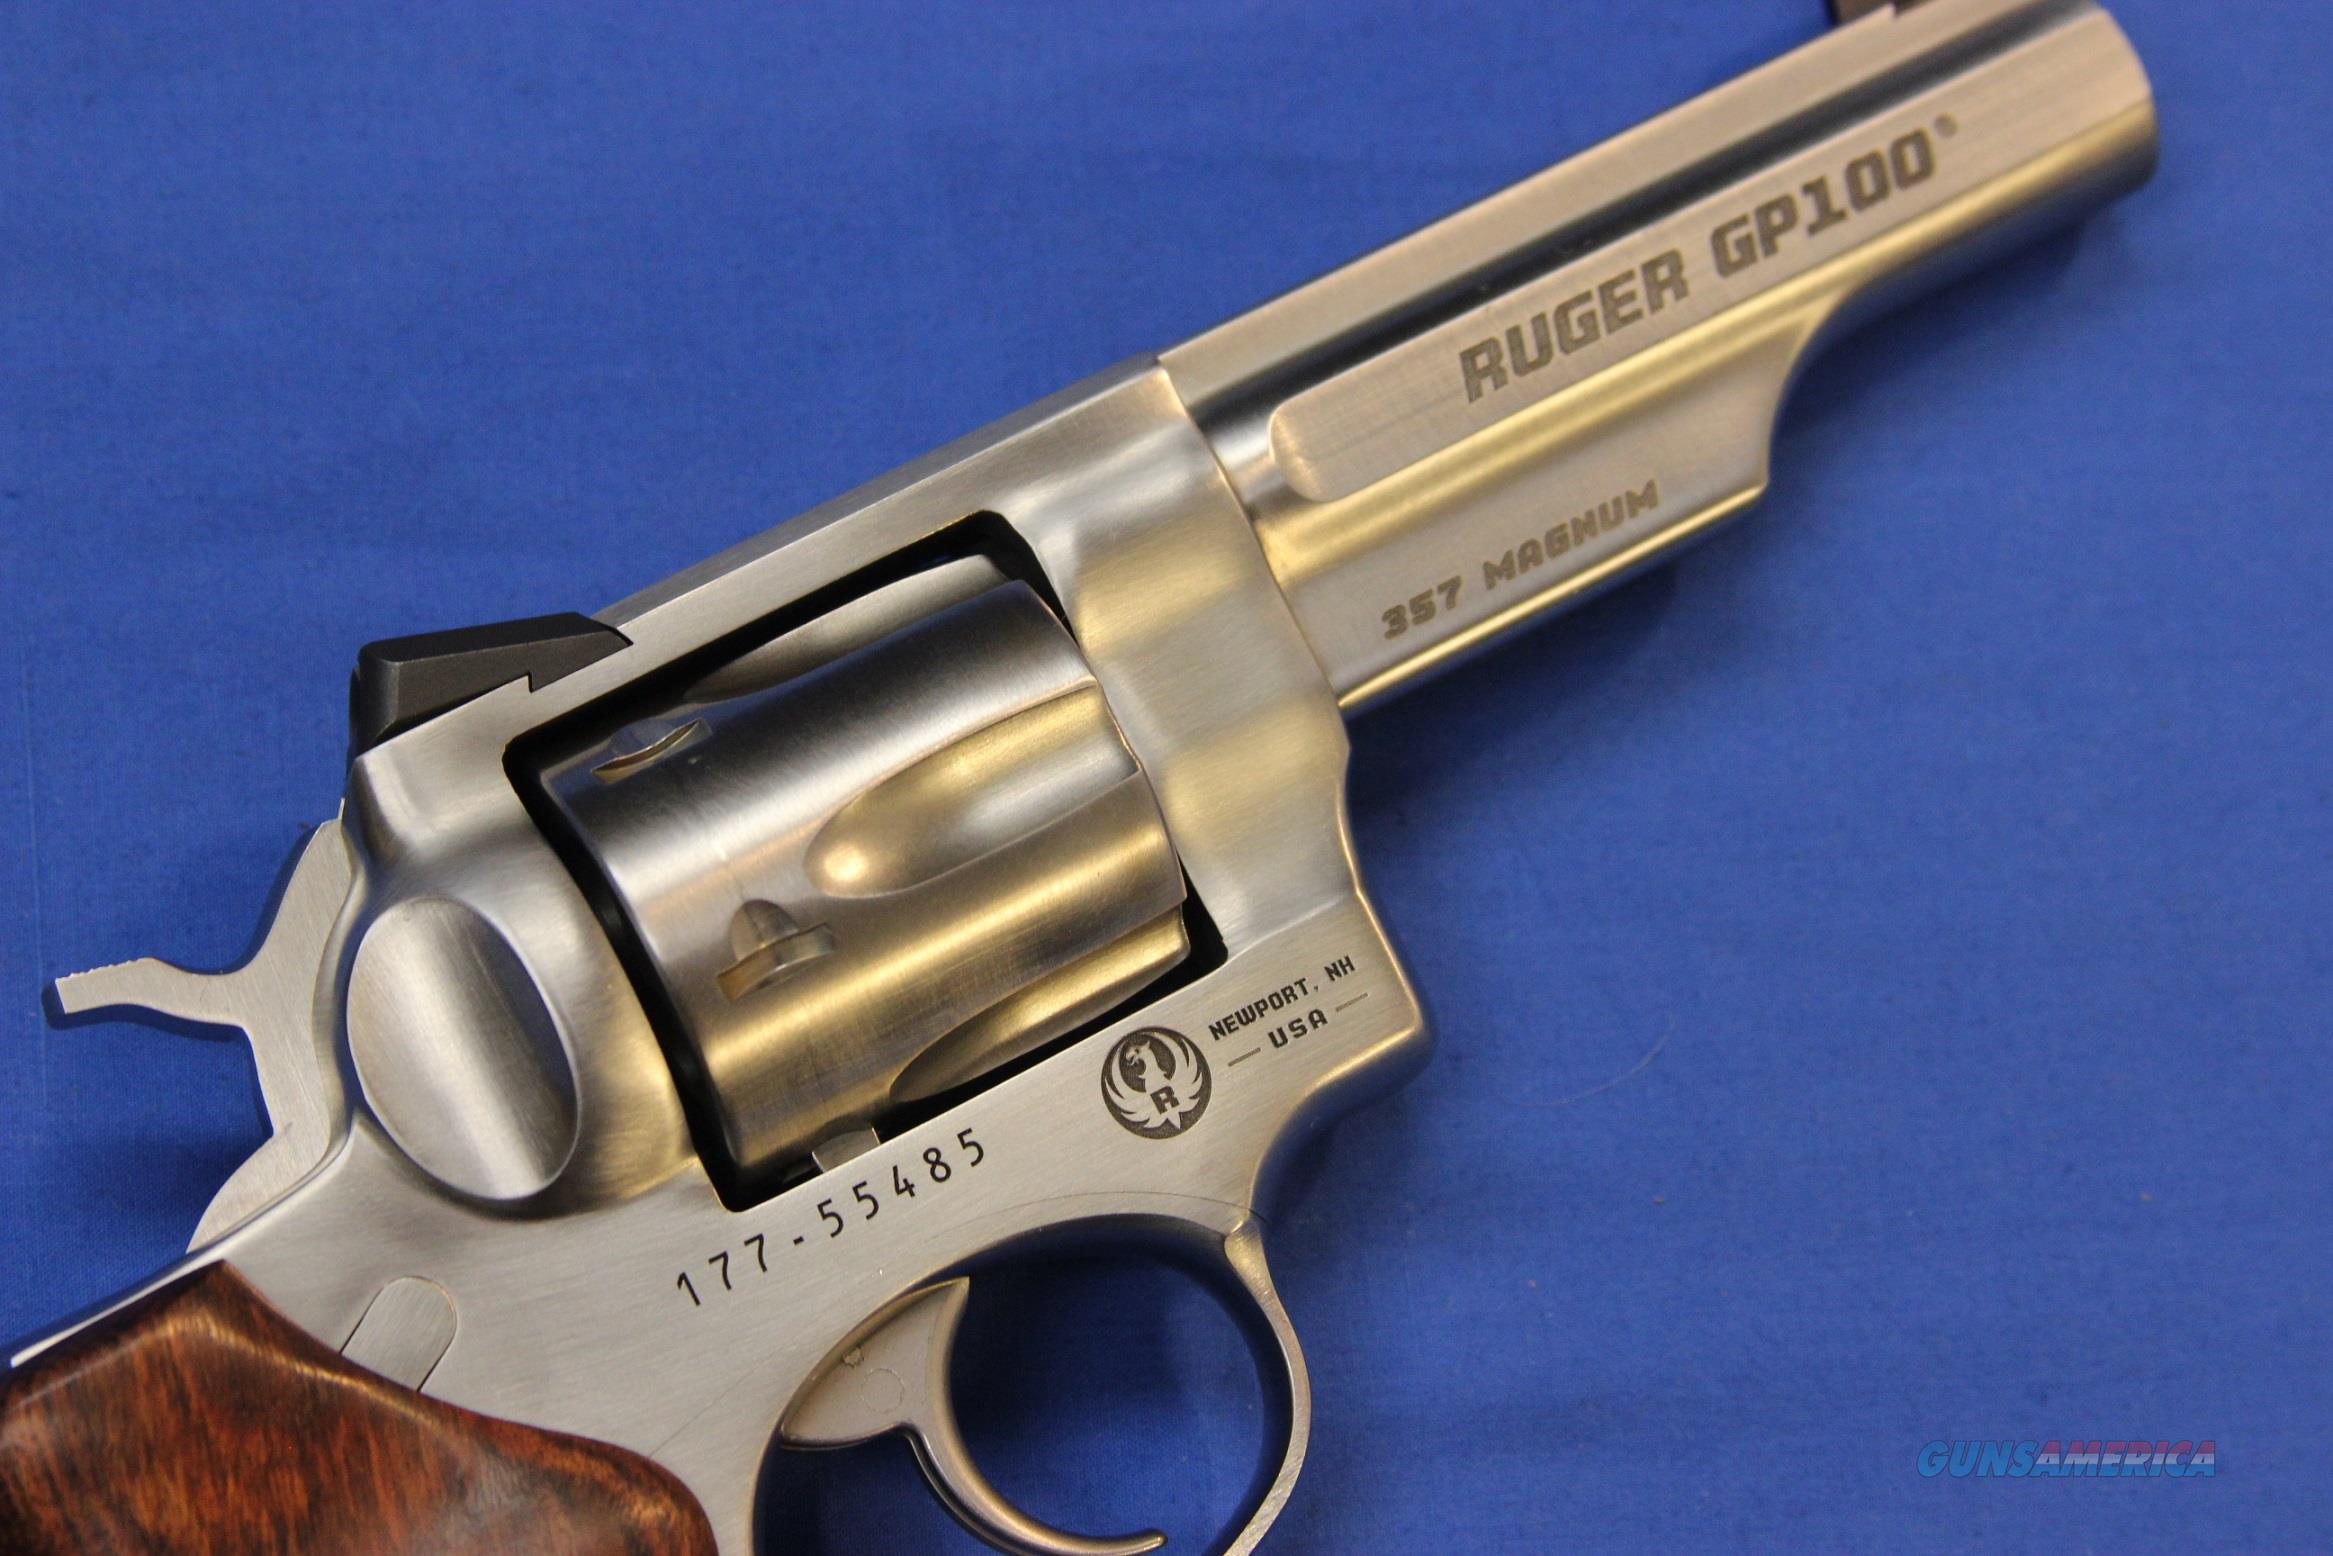 Ruger Gp100 Match Champion 357 Mag For Sale At 965839443 1661